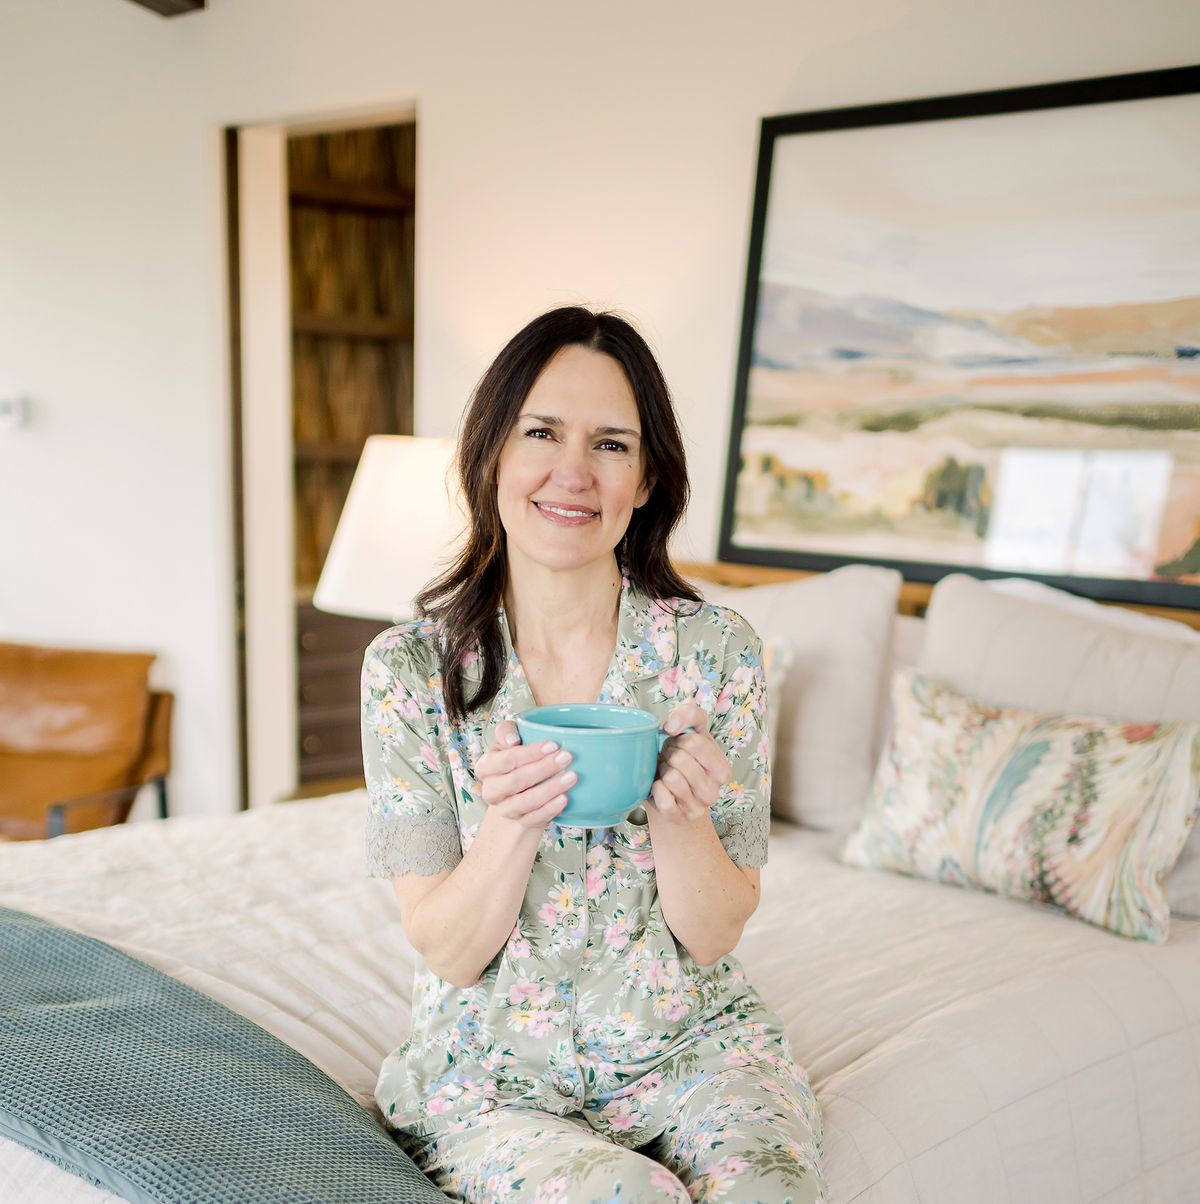 The Pioneer Woman Sleepwear Collection Has New Colors for Spring